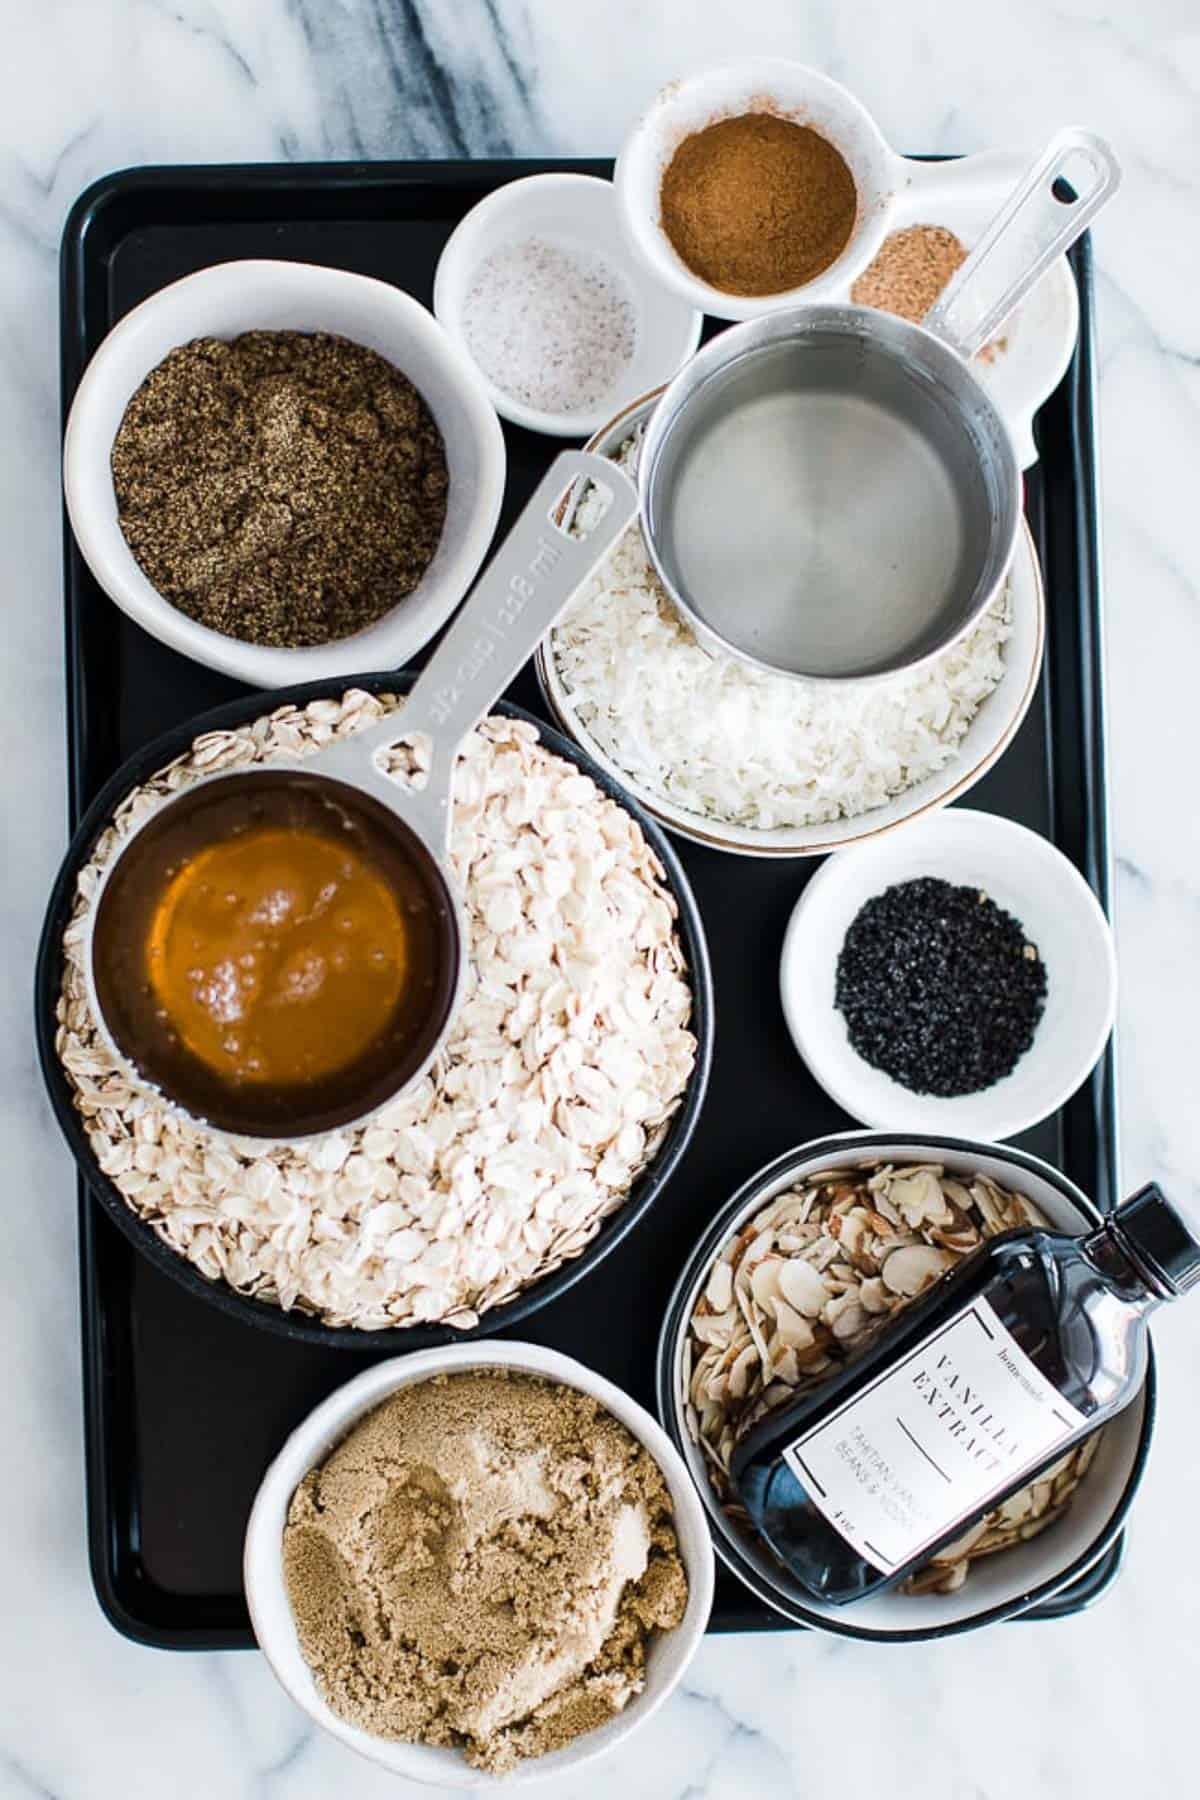 Ingredients to make healthy granola on a tray on the counter.